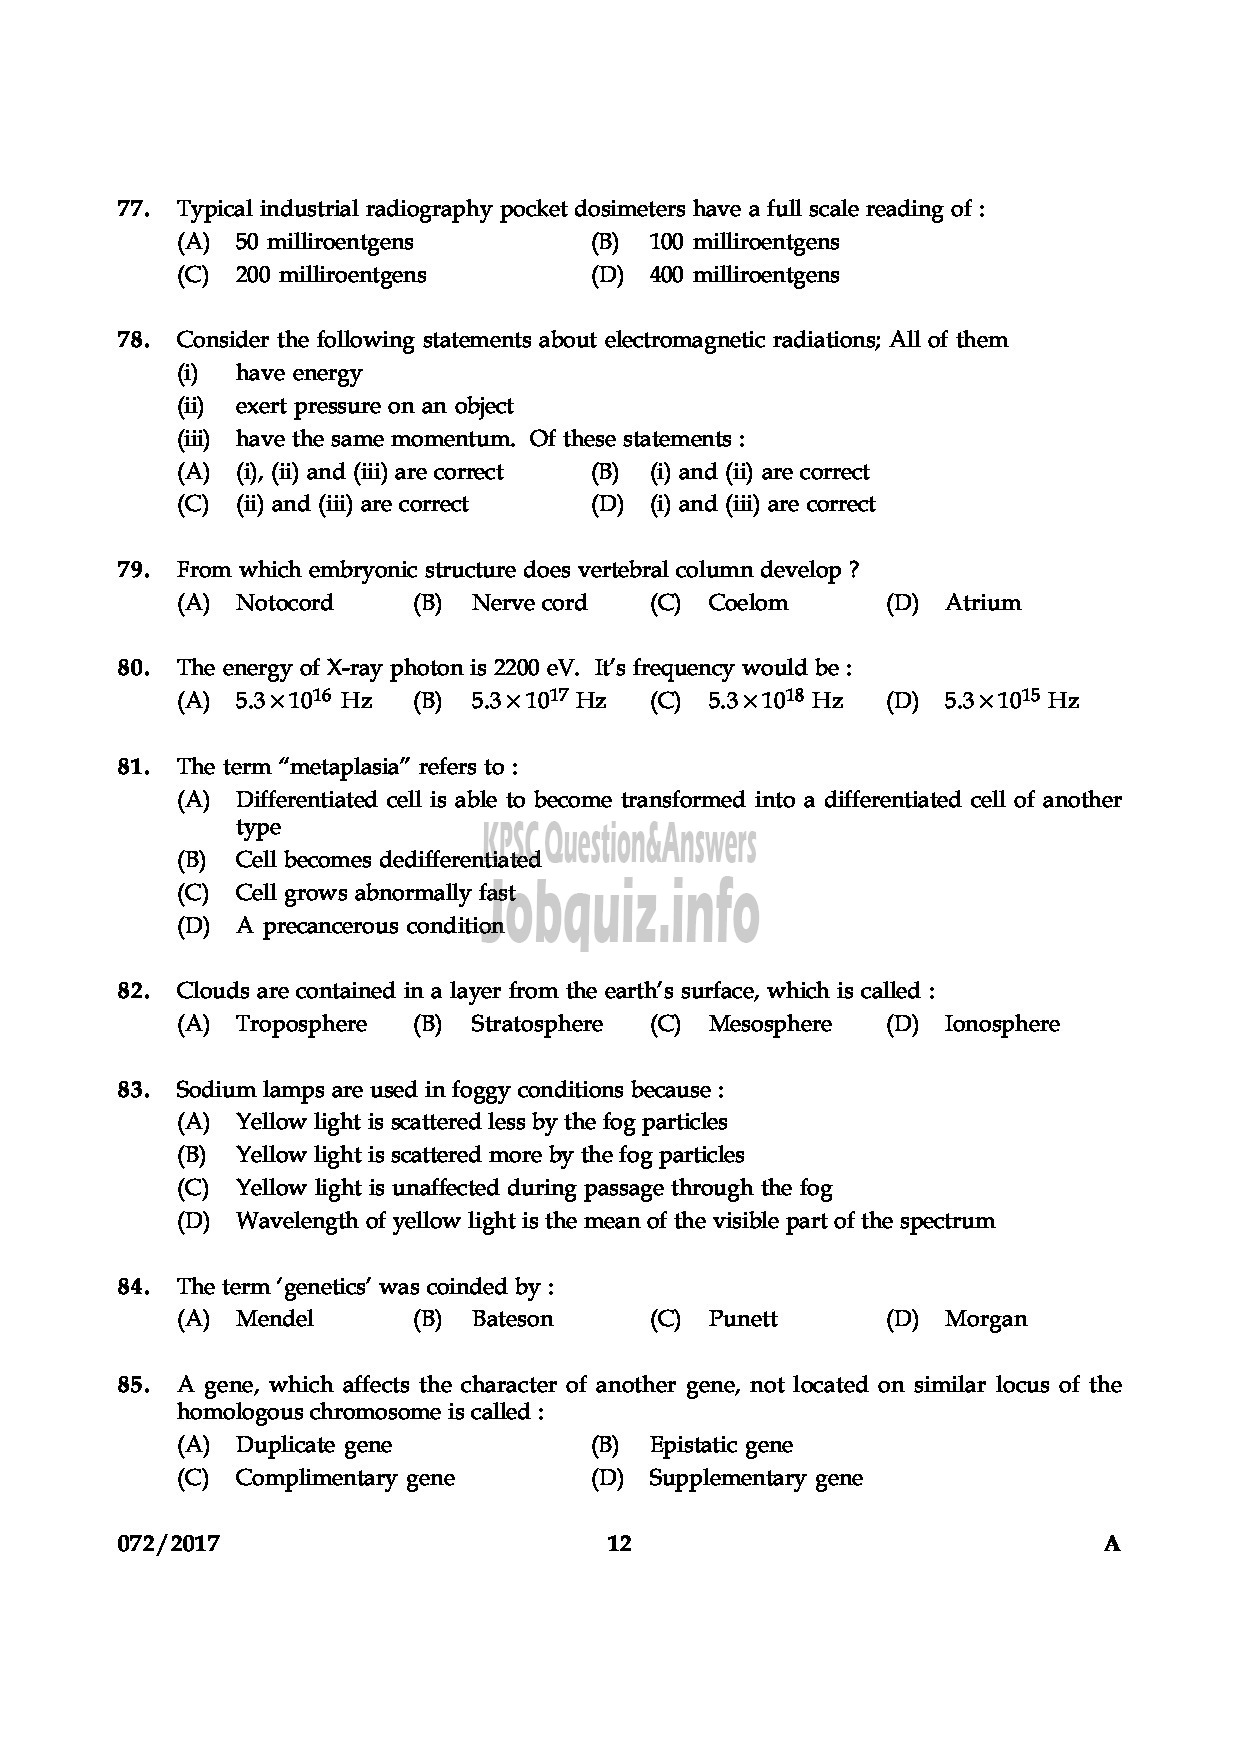 Kerala PSC Question Paper - RADIOGRAPHER GR.II HEALTH SERVICES QUESTION PAPER-11